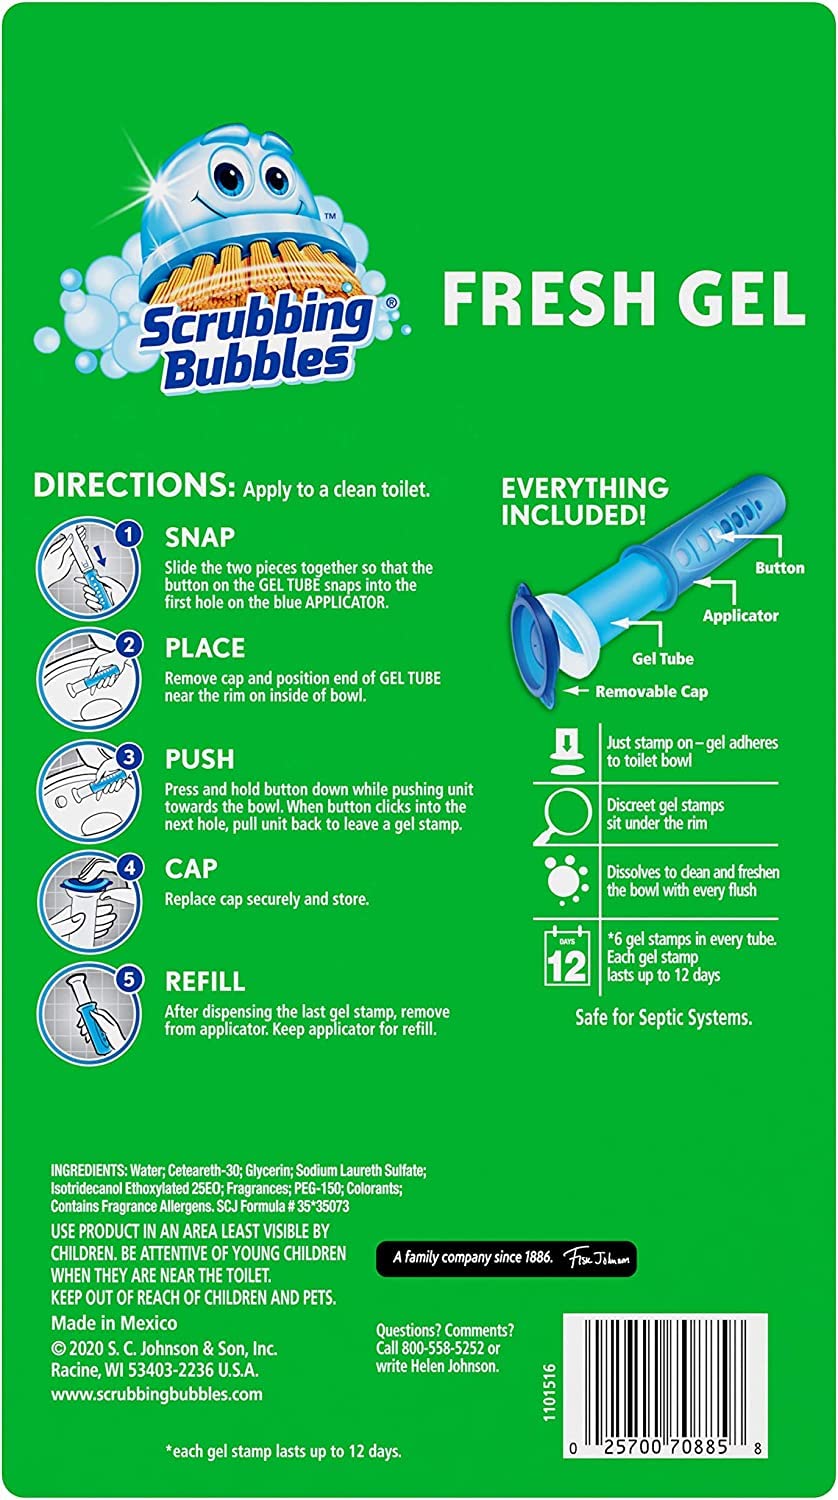 Scrubbing Bubbles Fresh Gel Toilet Cleaning Stamp, Rainshower, Dispenser with 24 Gel Stamps, 5.36 oz